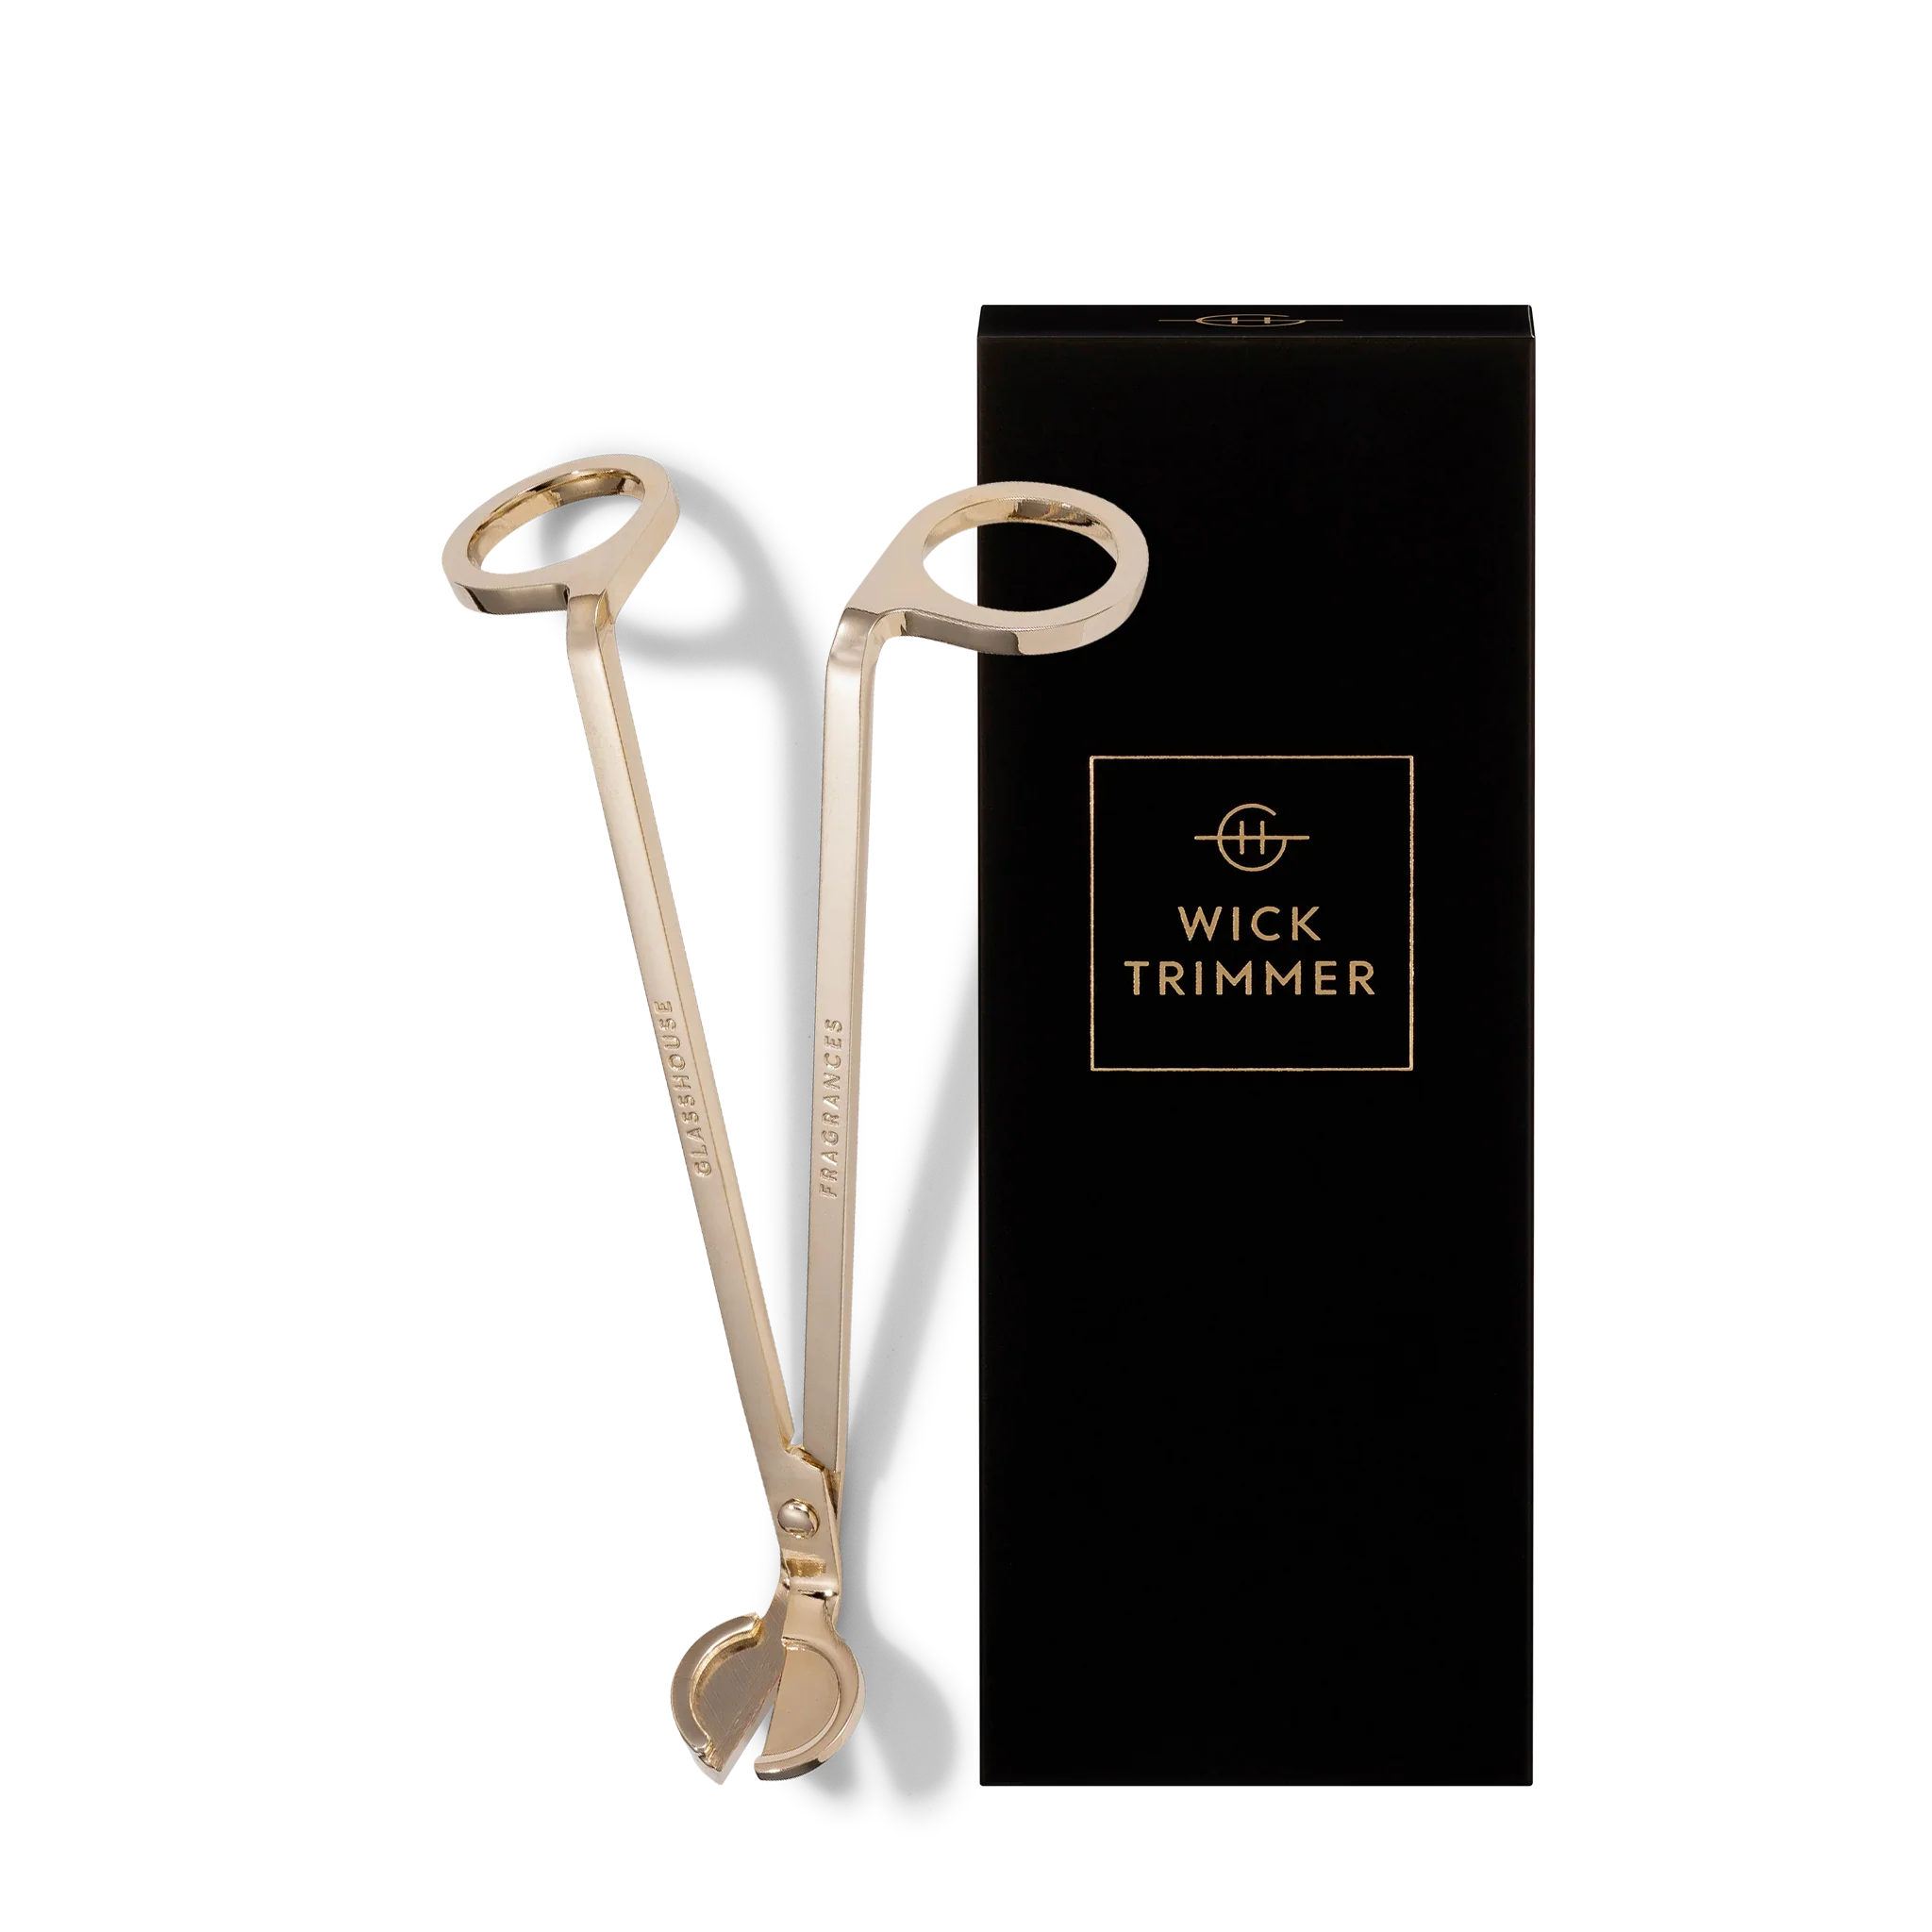 Wick Trimmer - Best Gift idea for the Candle lover